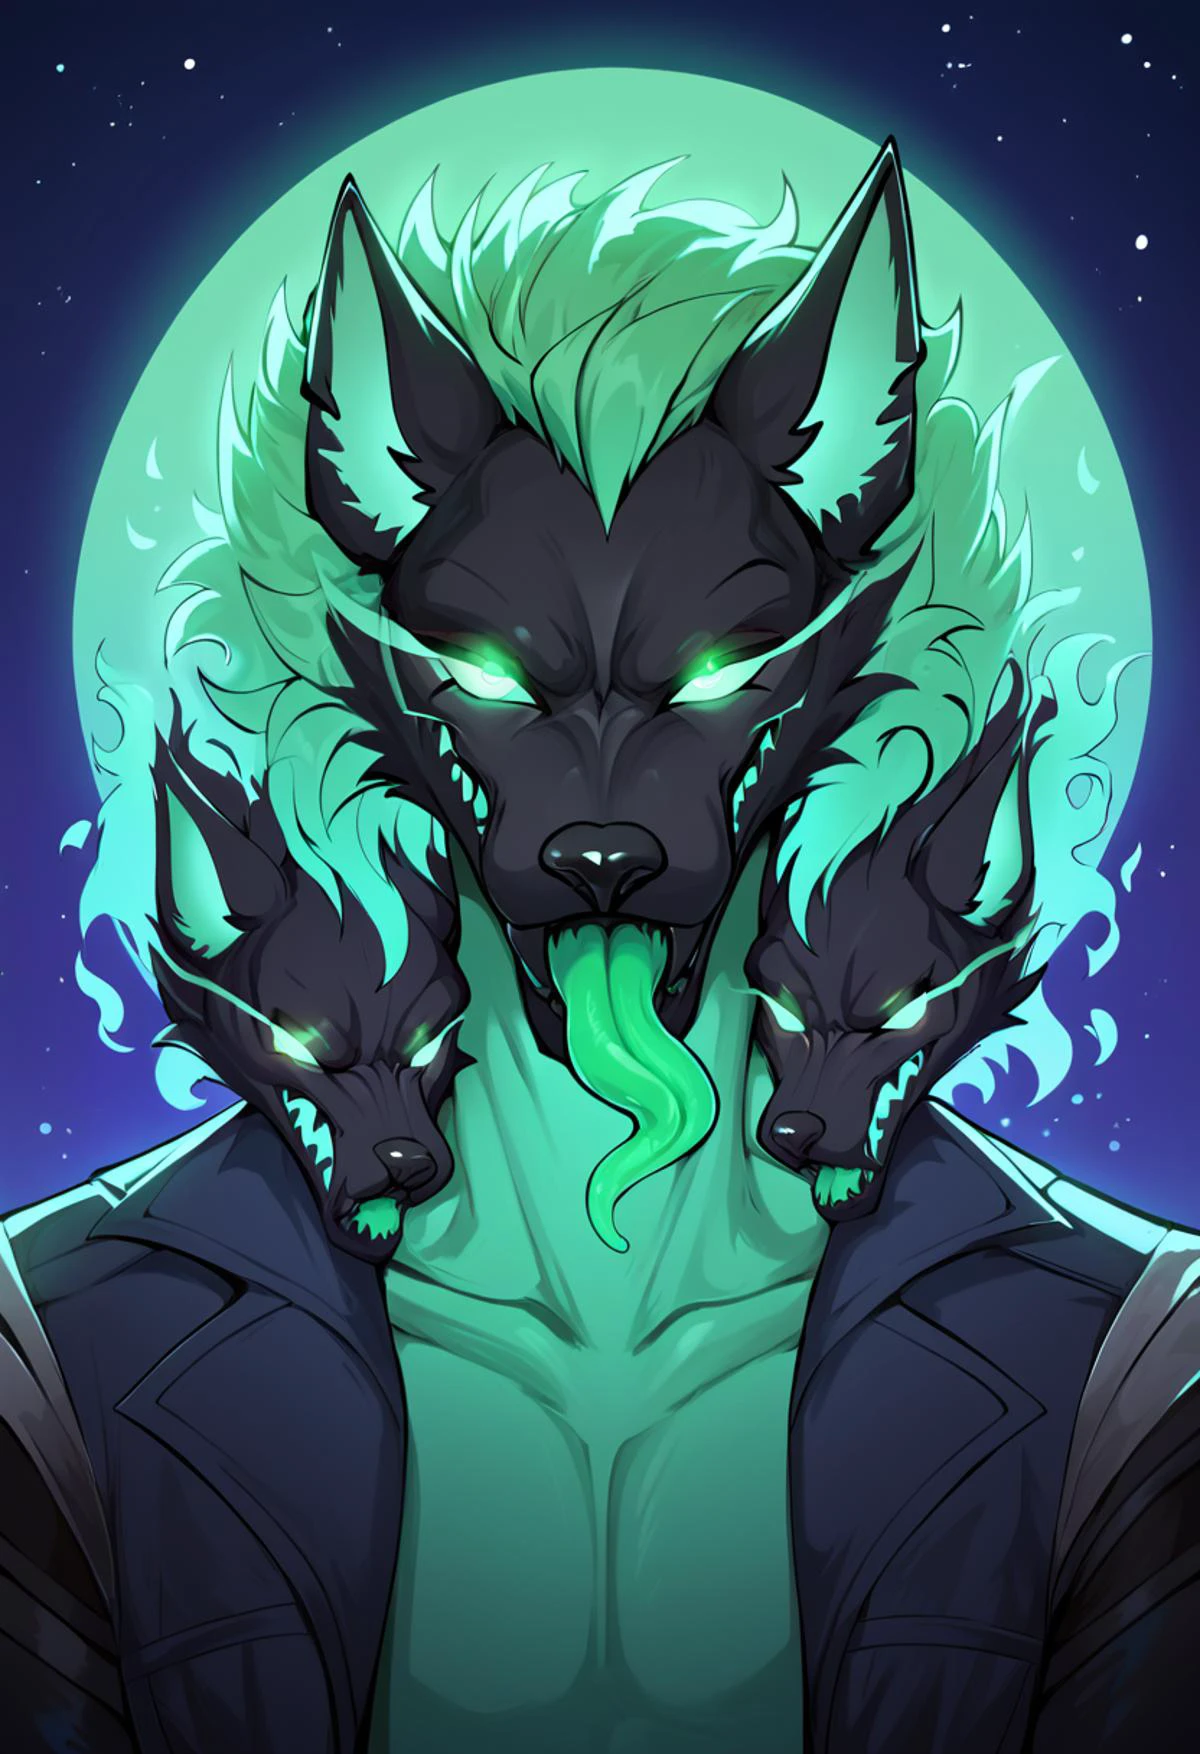 portrait of cerberus (fortnite), rating_safe, Green body, Green Eyes,Glowing Eyes, male, (multi head), tongue out, green tongue
purple tshirt,glowing frame, backlight colors, silhouette colors, cosmic frame, silhouette, backlighting, vibrant, magical night sky, illustration, soft, beautiful,, score_9, score_8_up, score_7_up, score_6_up, score_5_up, score_4_up